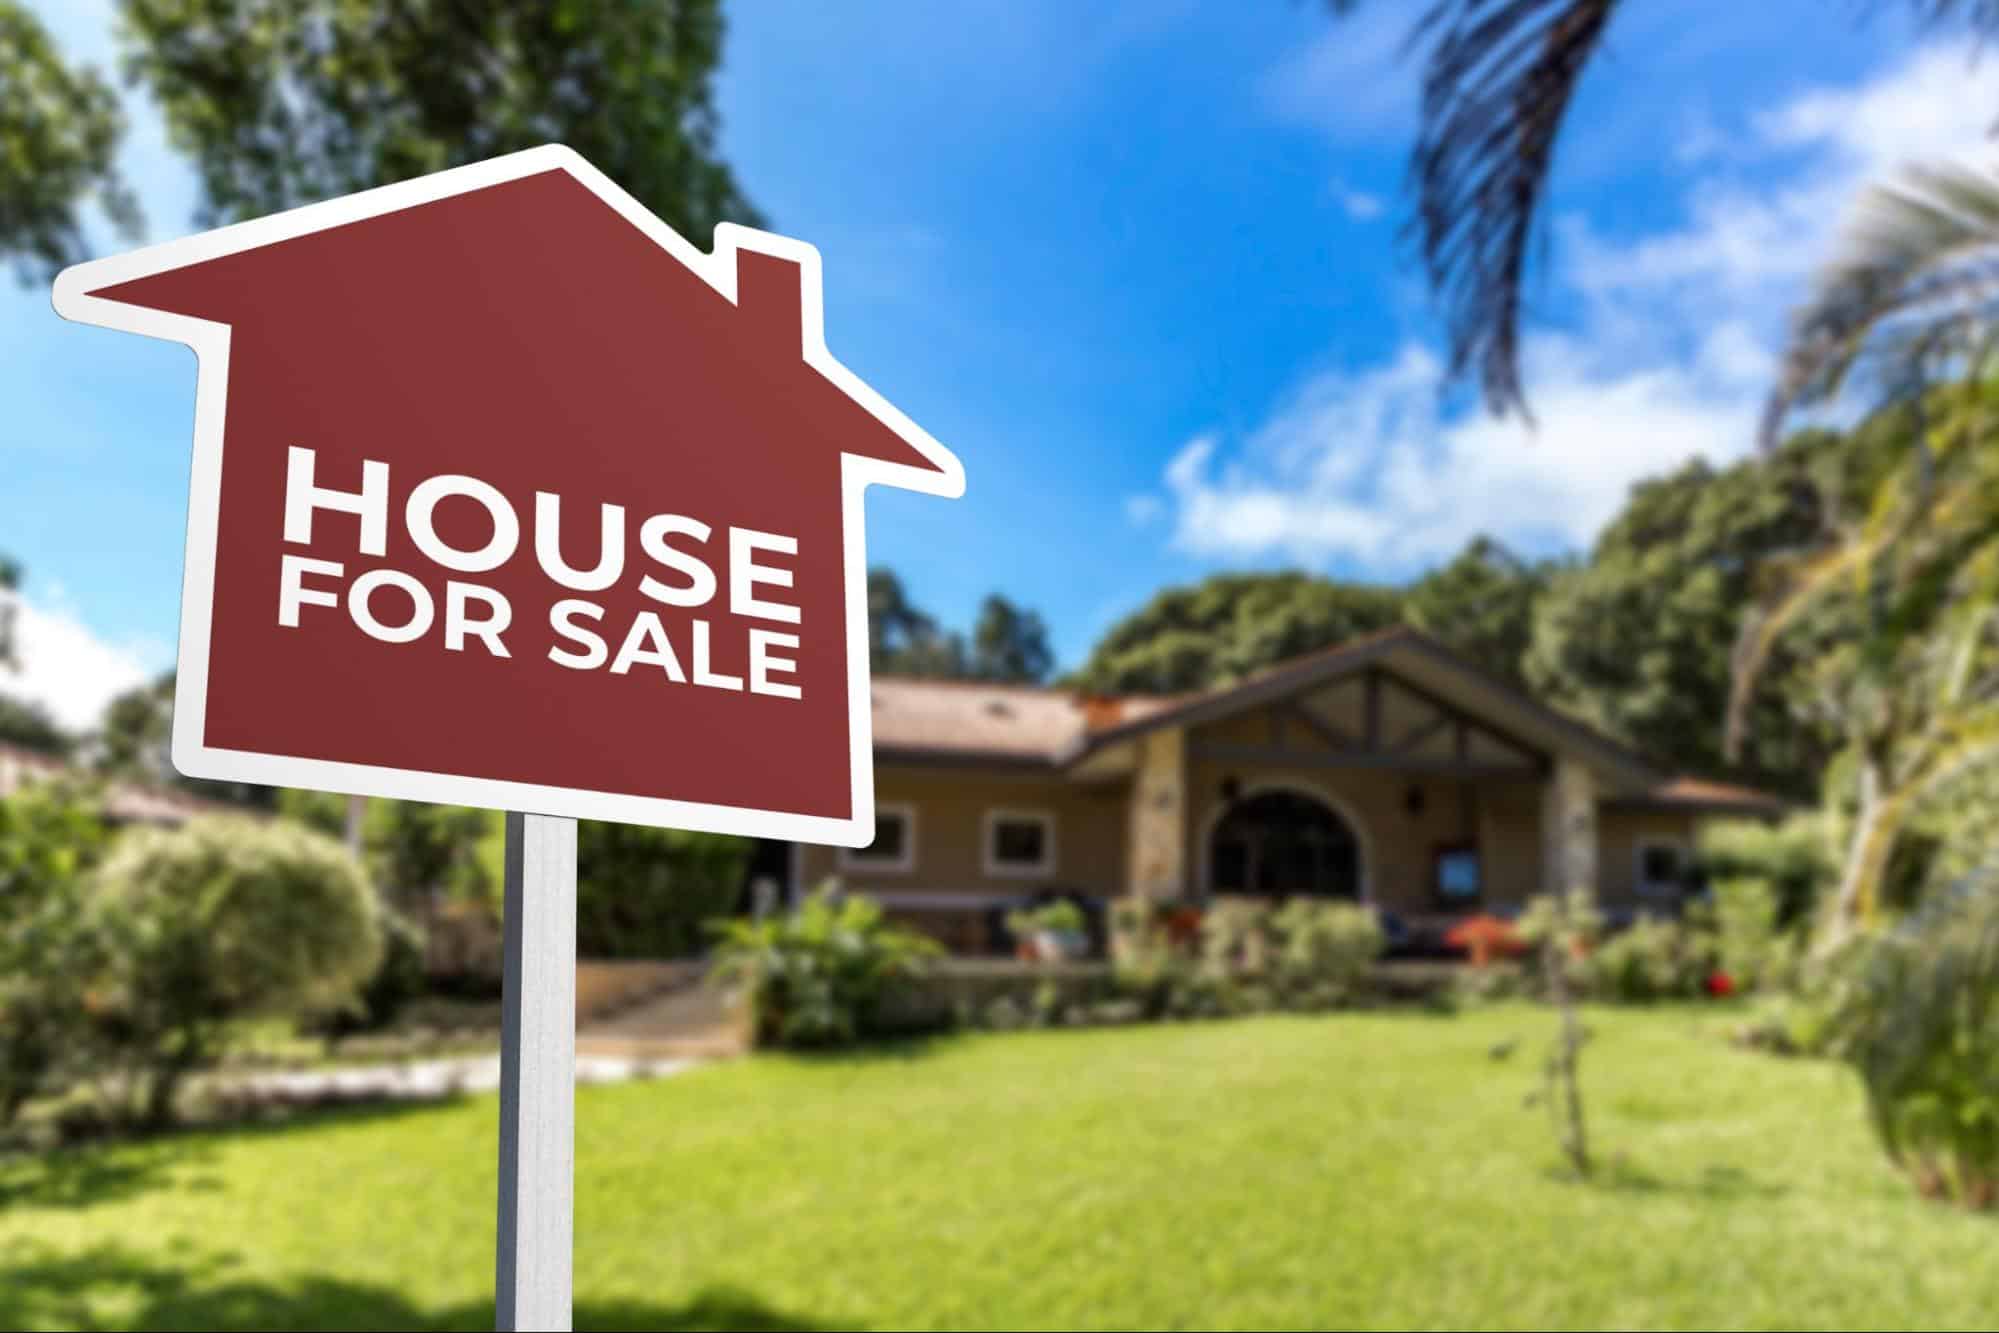 Sell Your House Fast In Salt Lake City: A Hassle-free Solution For Problem Neighbors